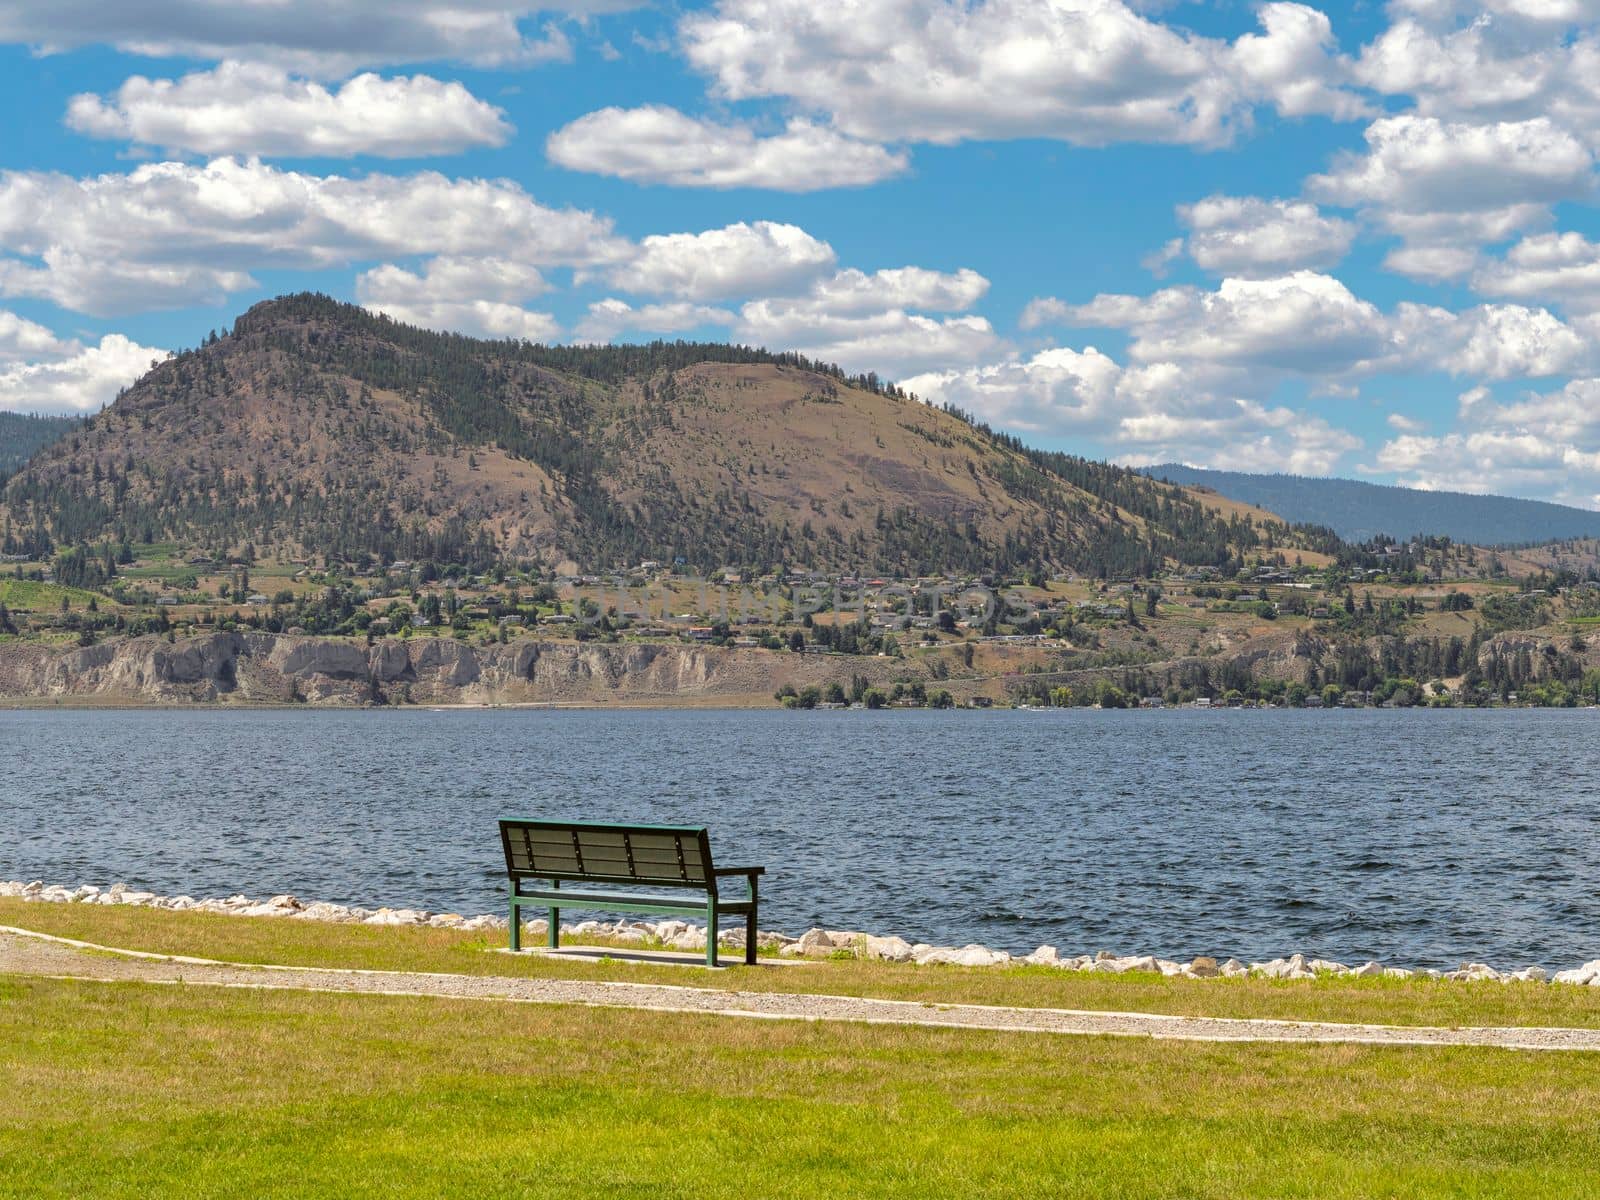 Scenery Okanagan lake overview with the bench at the pathway along the waterfront